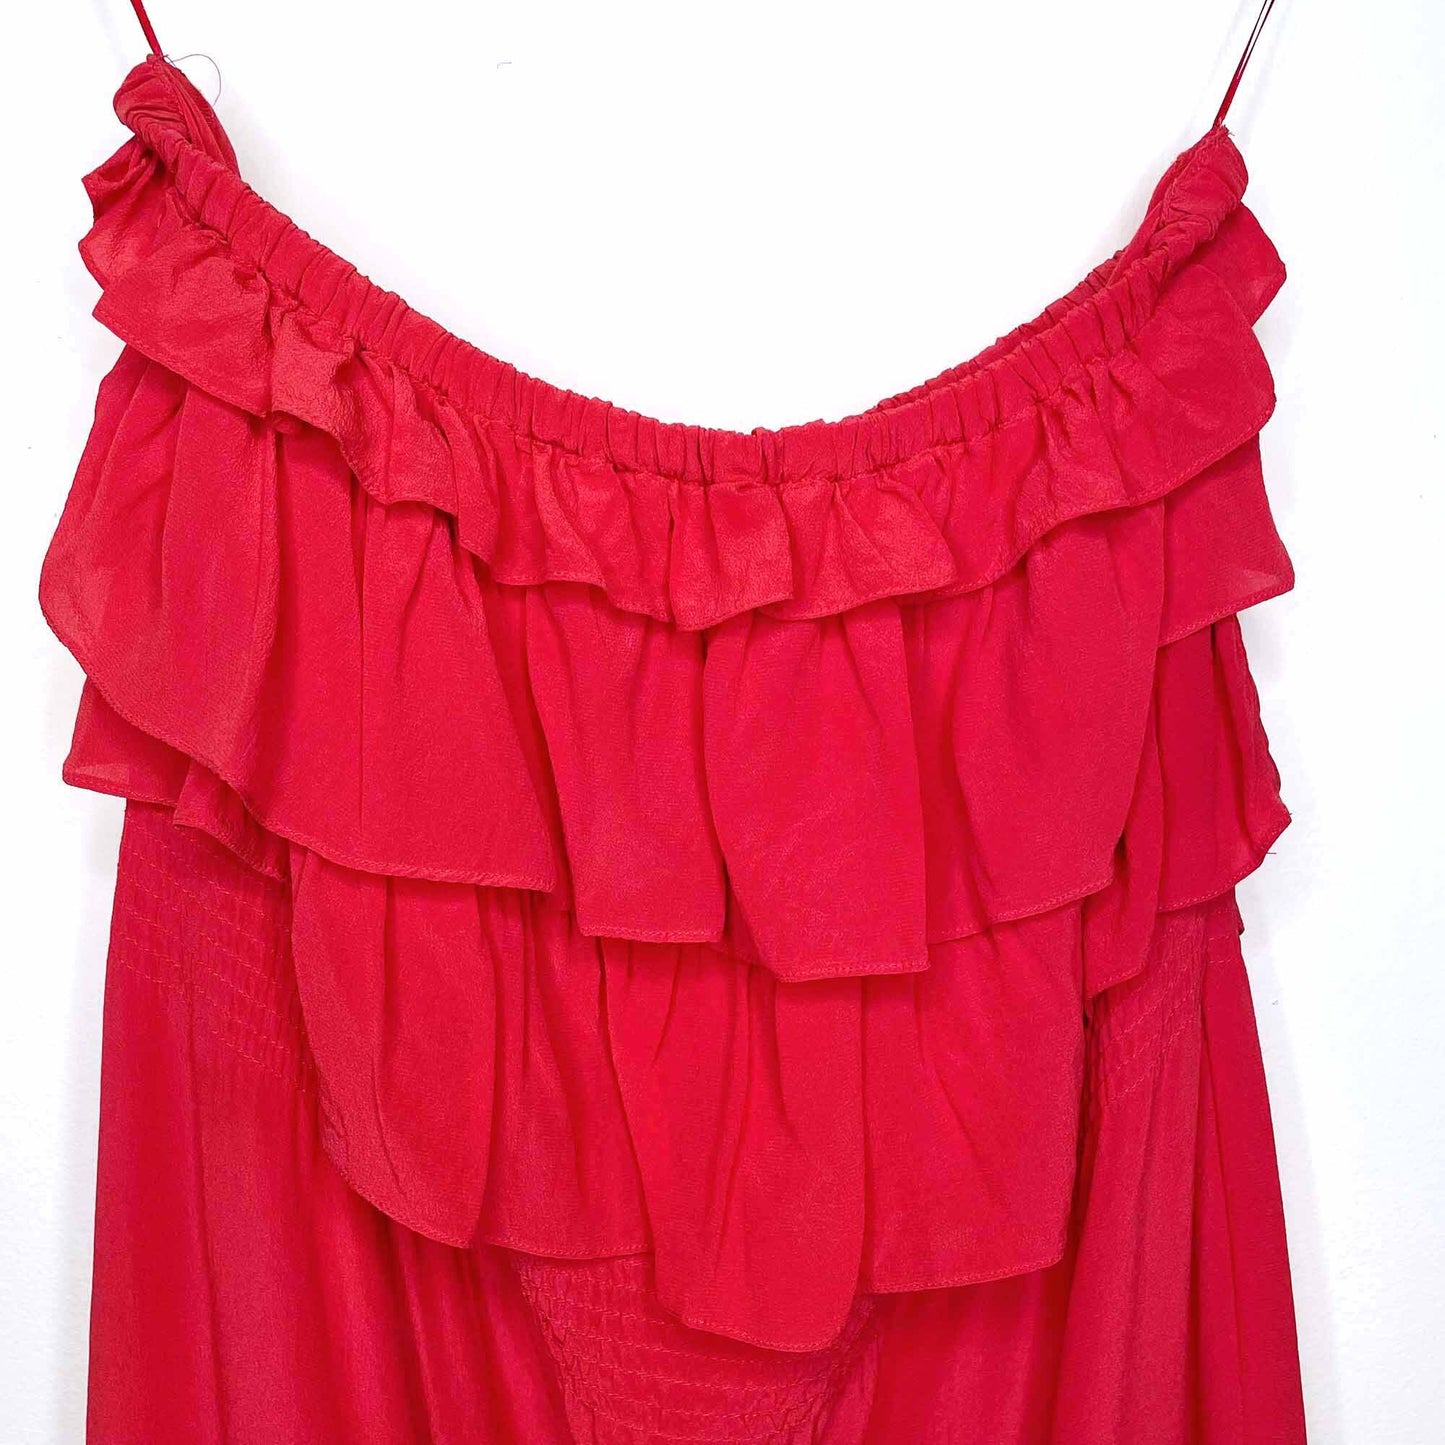 rebecca taylor strapless chelsea silk dress with ruffles - size 4